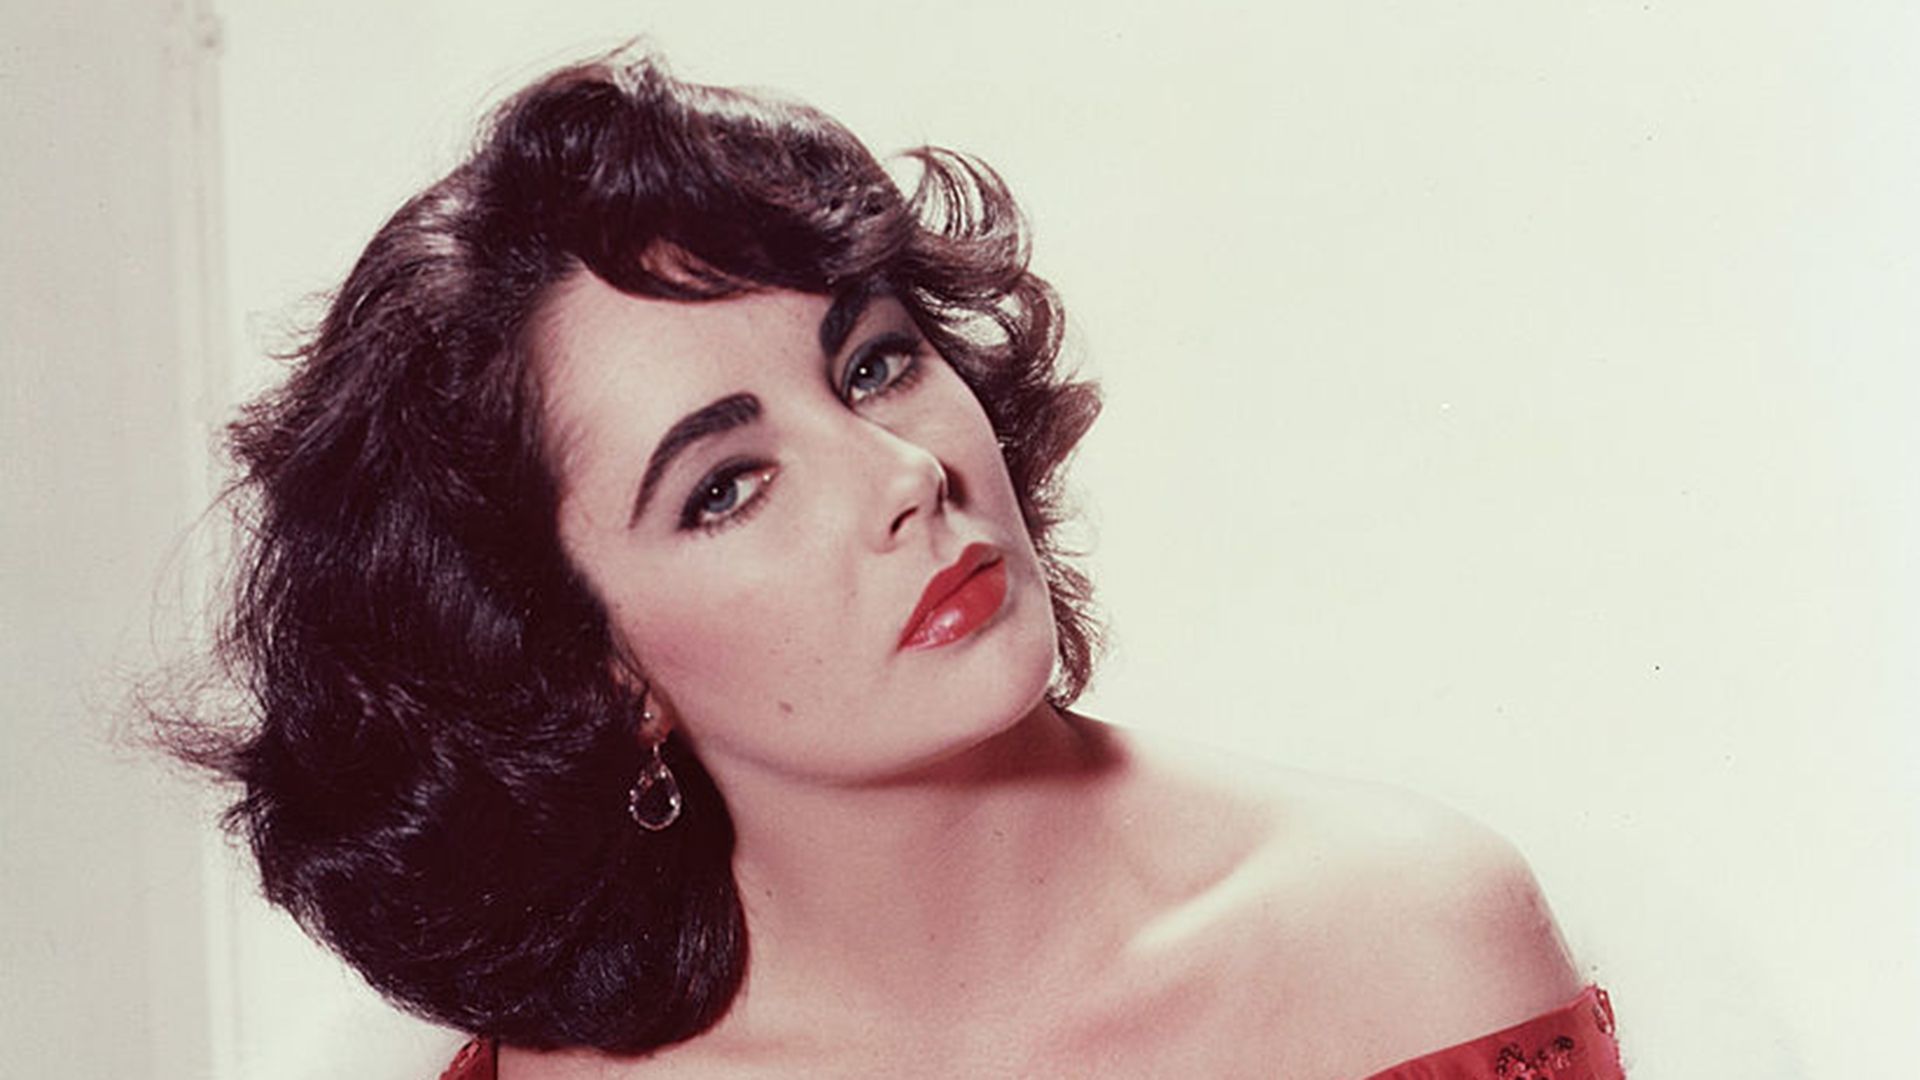 Elizabeth Taylor poses in a red dress 